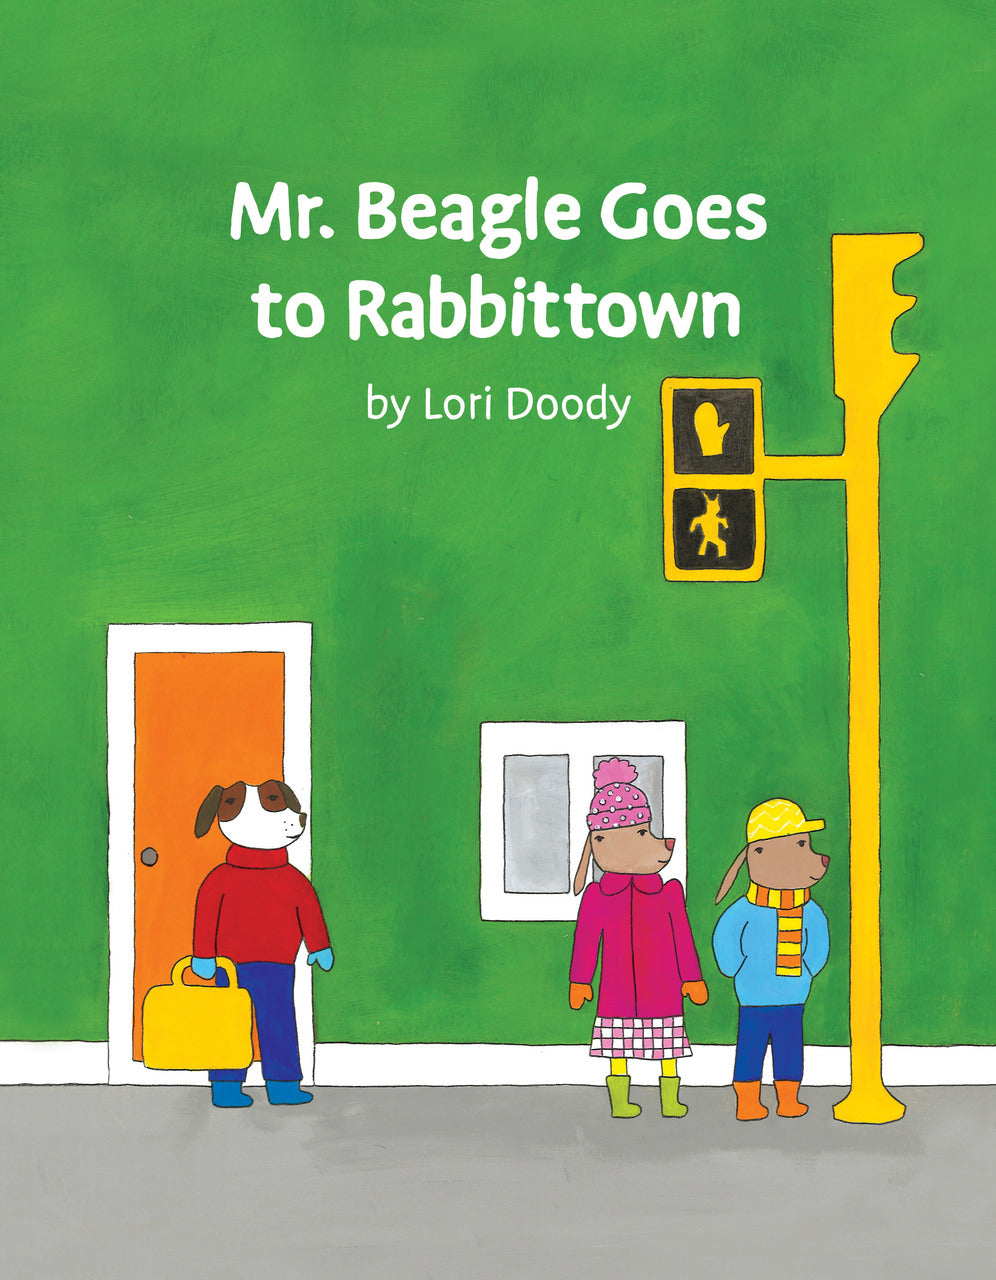 Mr. Beagle Goes to Rabbittown by Lori Doody